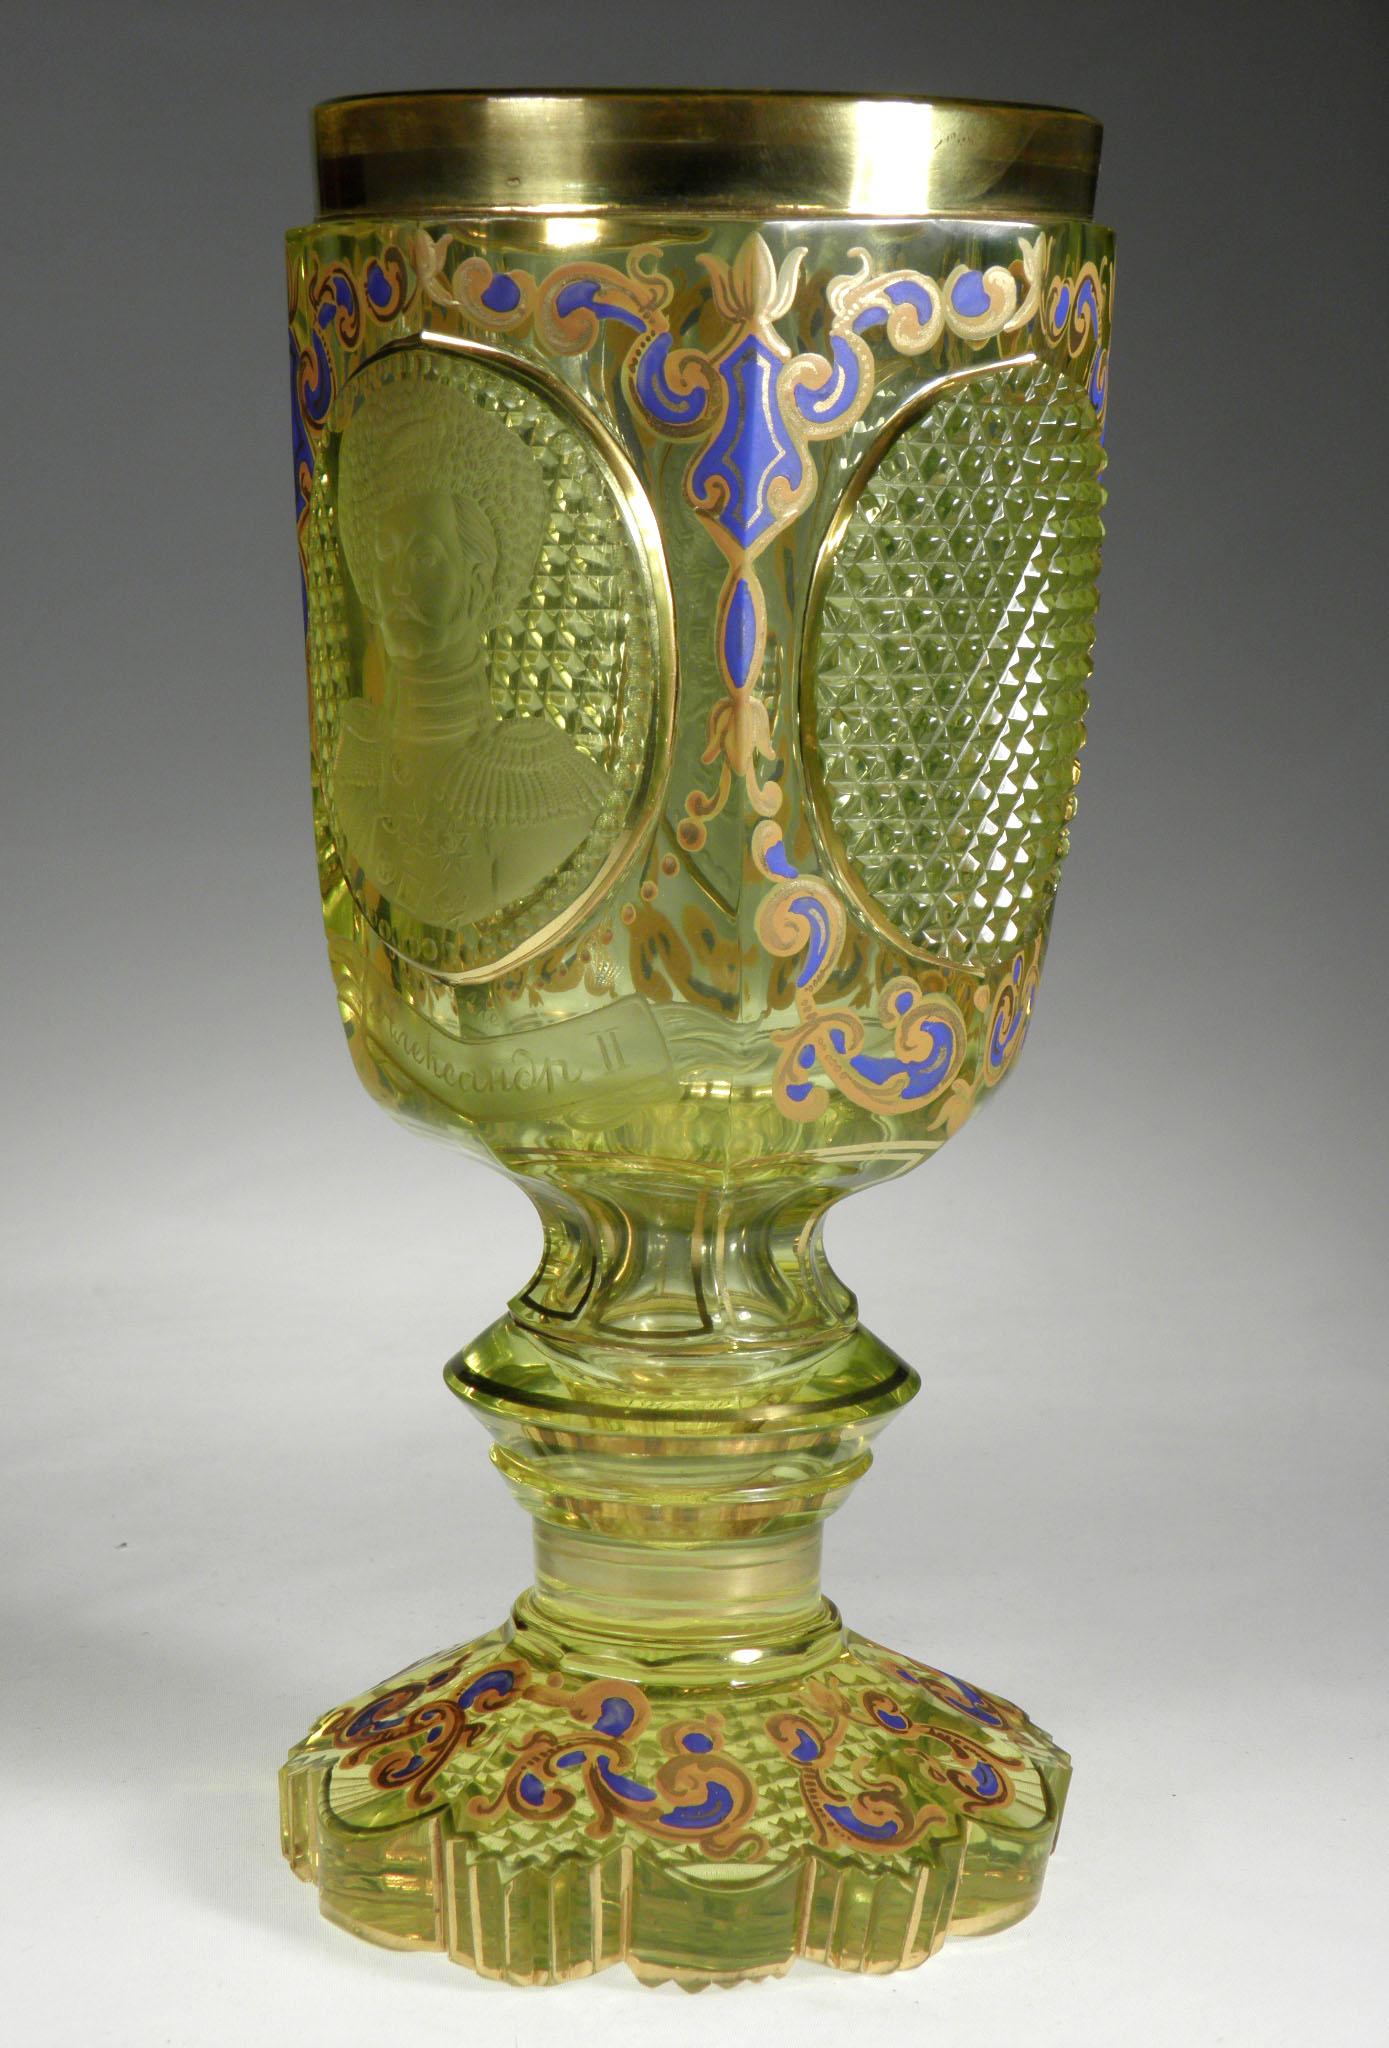 Antique Goblet made of uran glass, 19th-20th century. Hand engraved and hand painted.
Portrait of Alexander II.